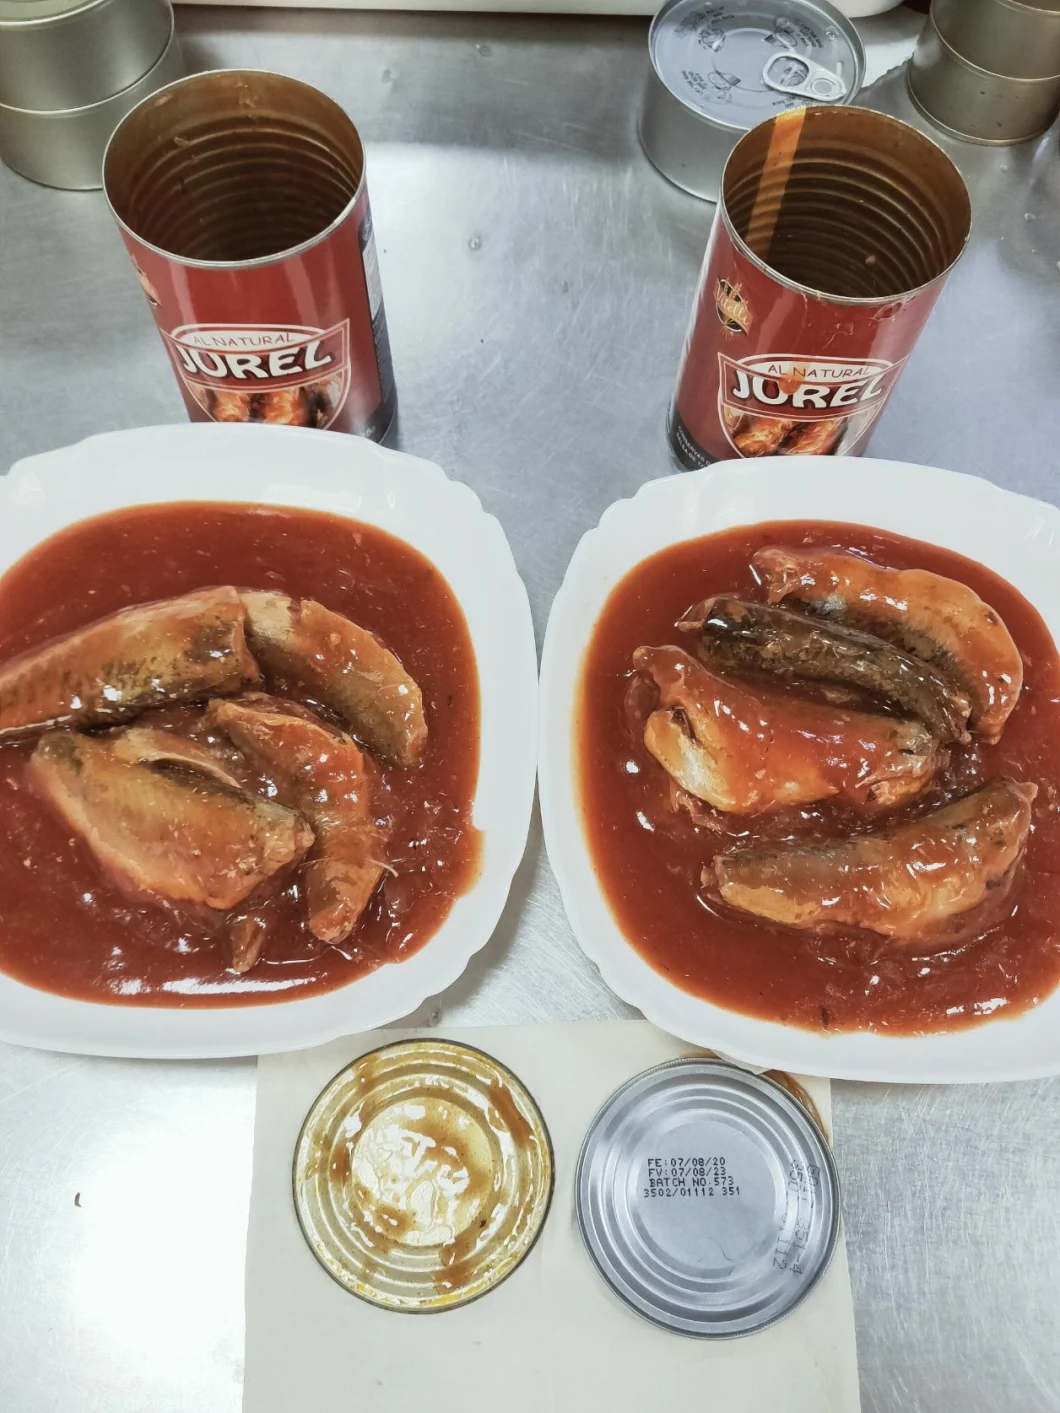 China Canned Fish Canned Mackerel in Tomato Sauce 425g